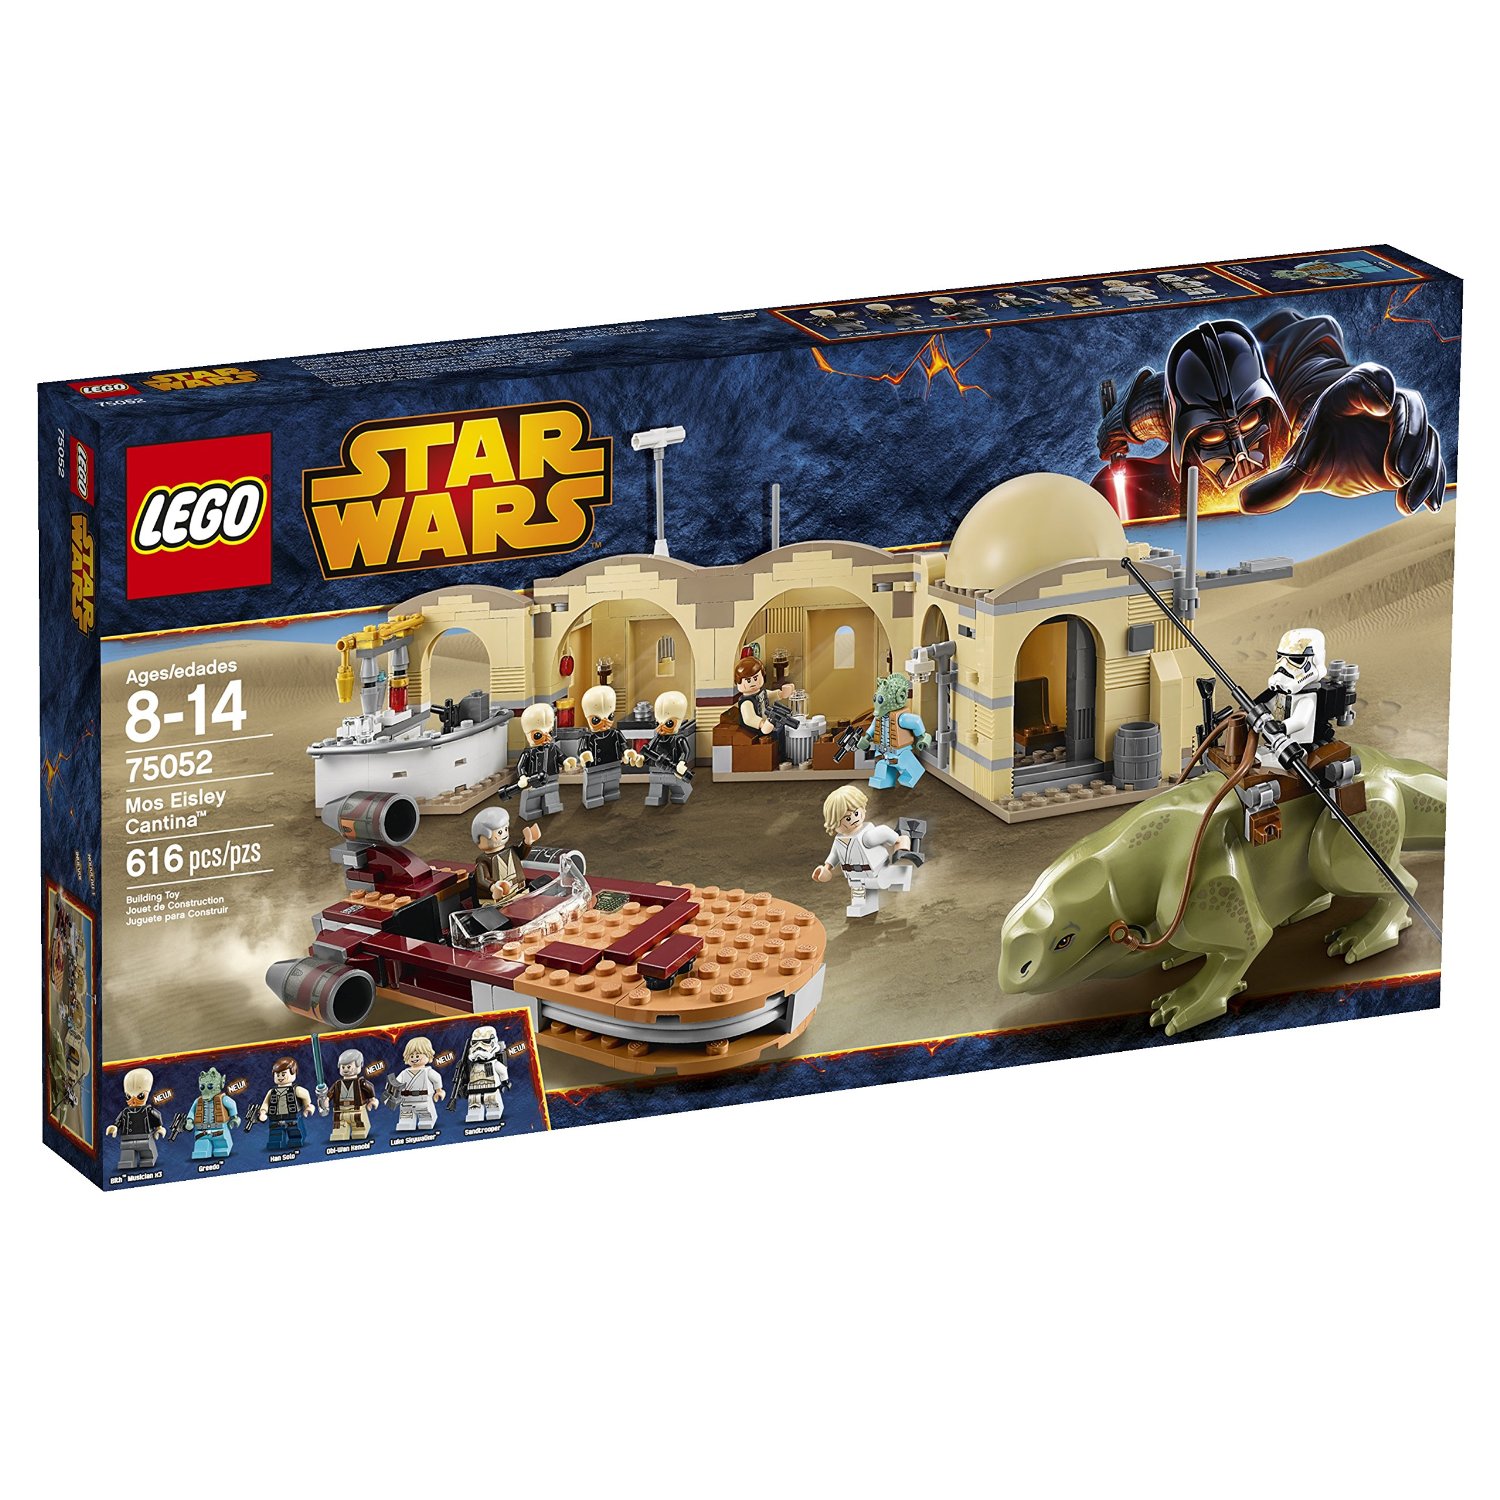 Summer Star Wars Sets Available For Pre-Order On Amazon.com - FBTB